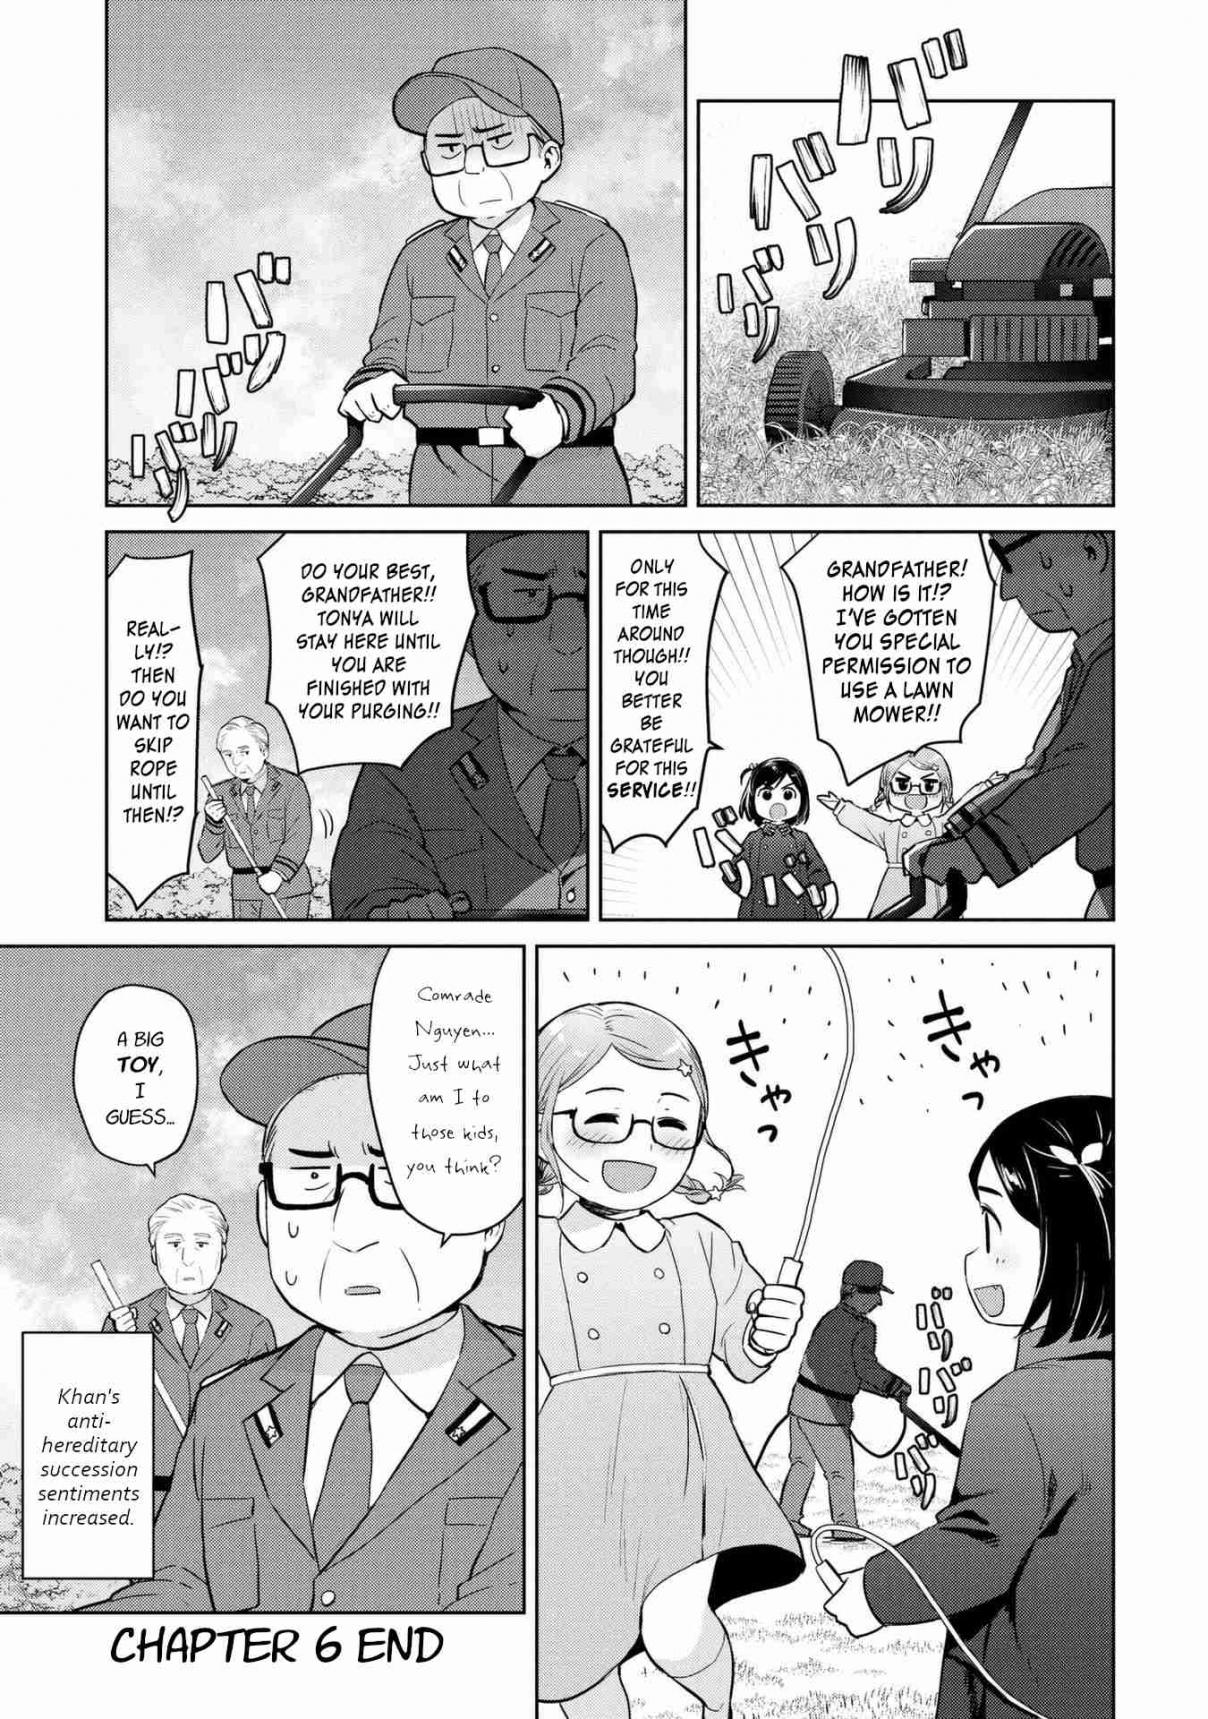 Oh, Our General Myao Vol. 1 Ch. 6 In Which Myao Plays With a Friend